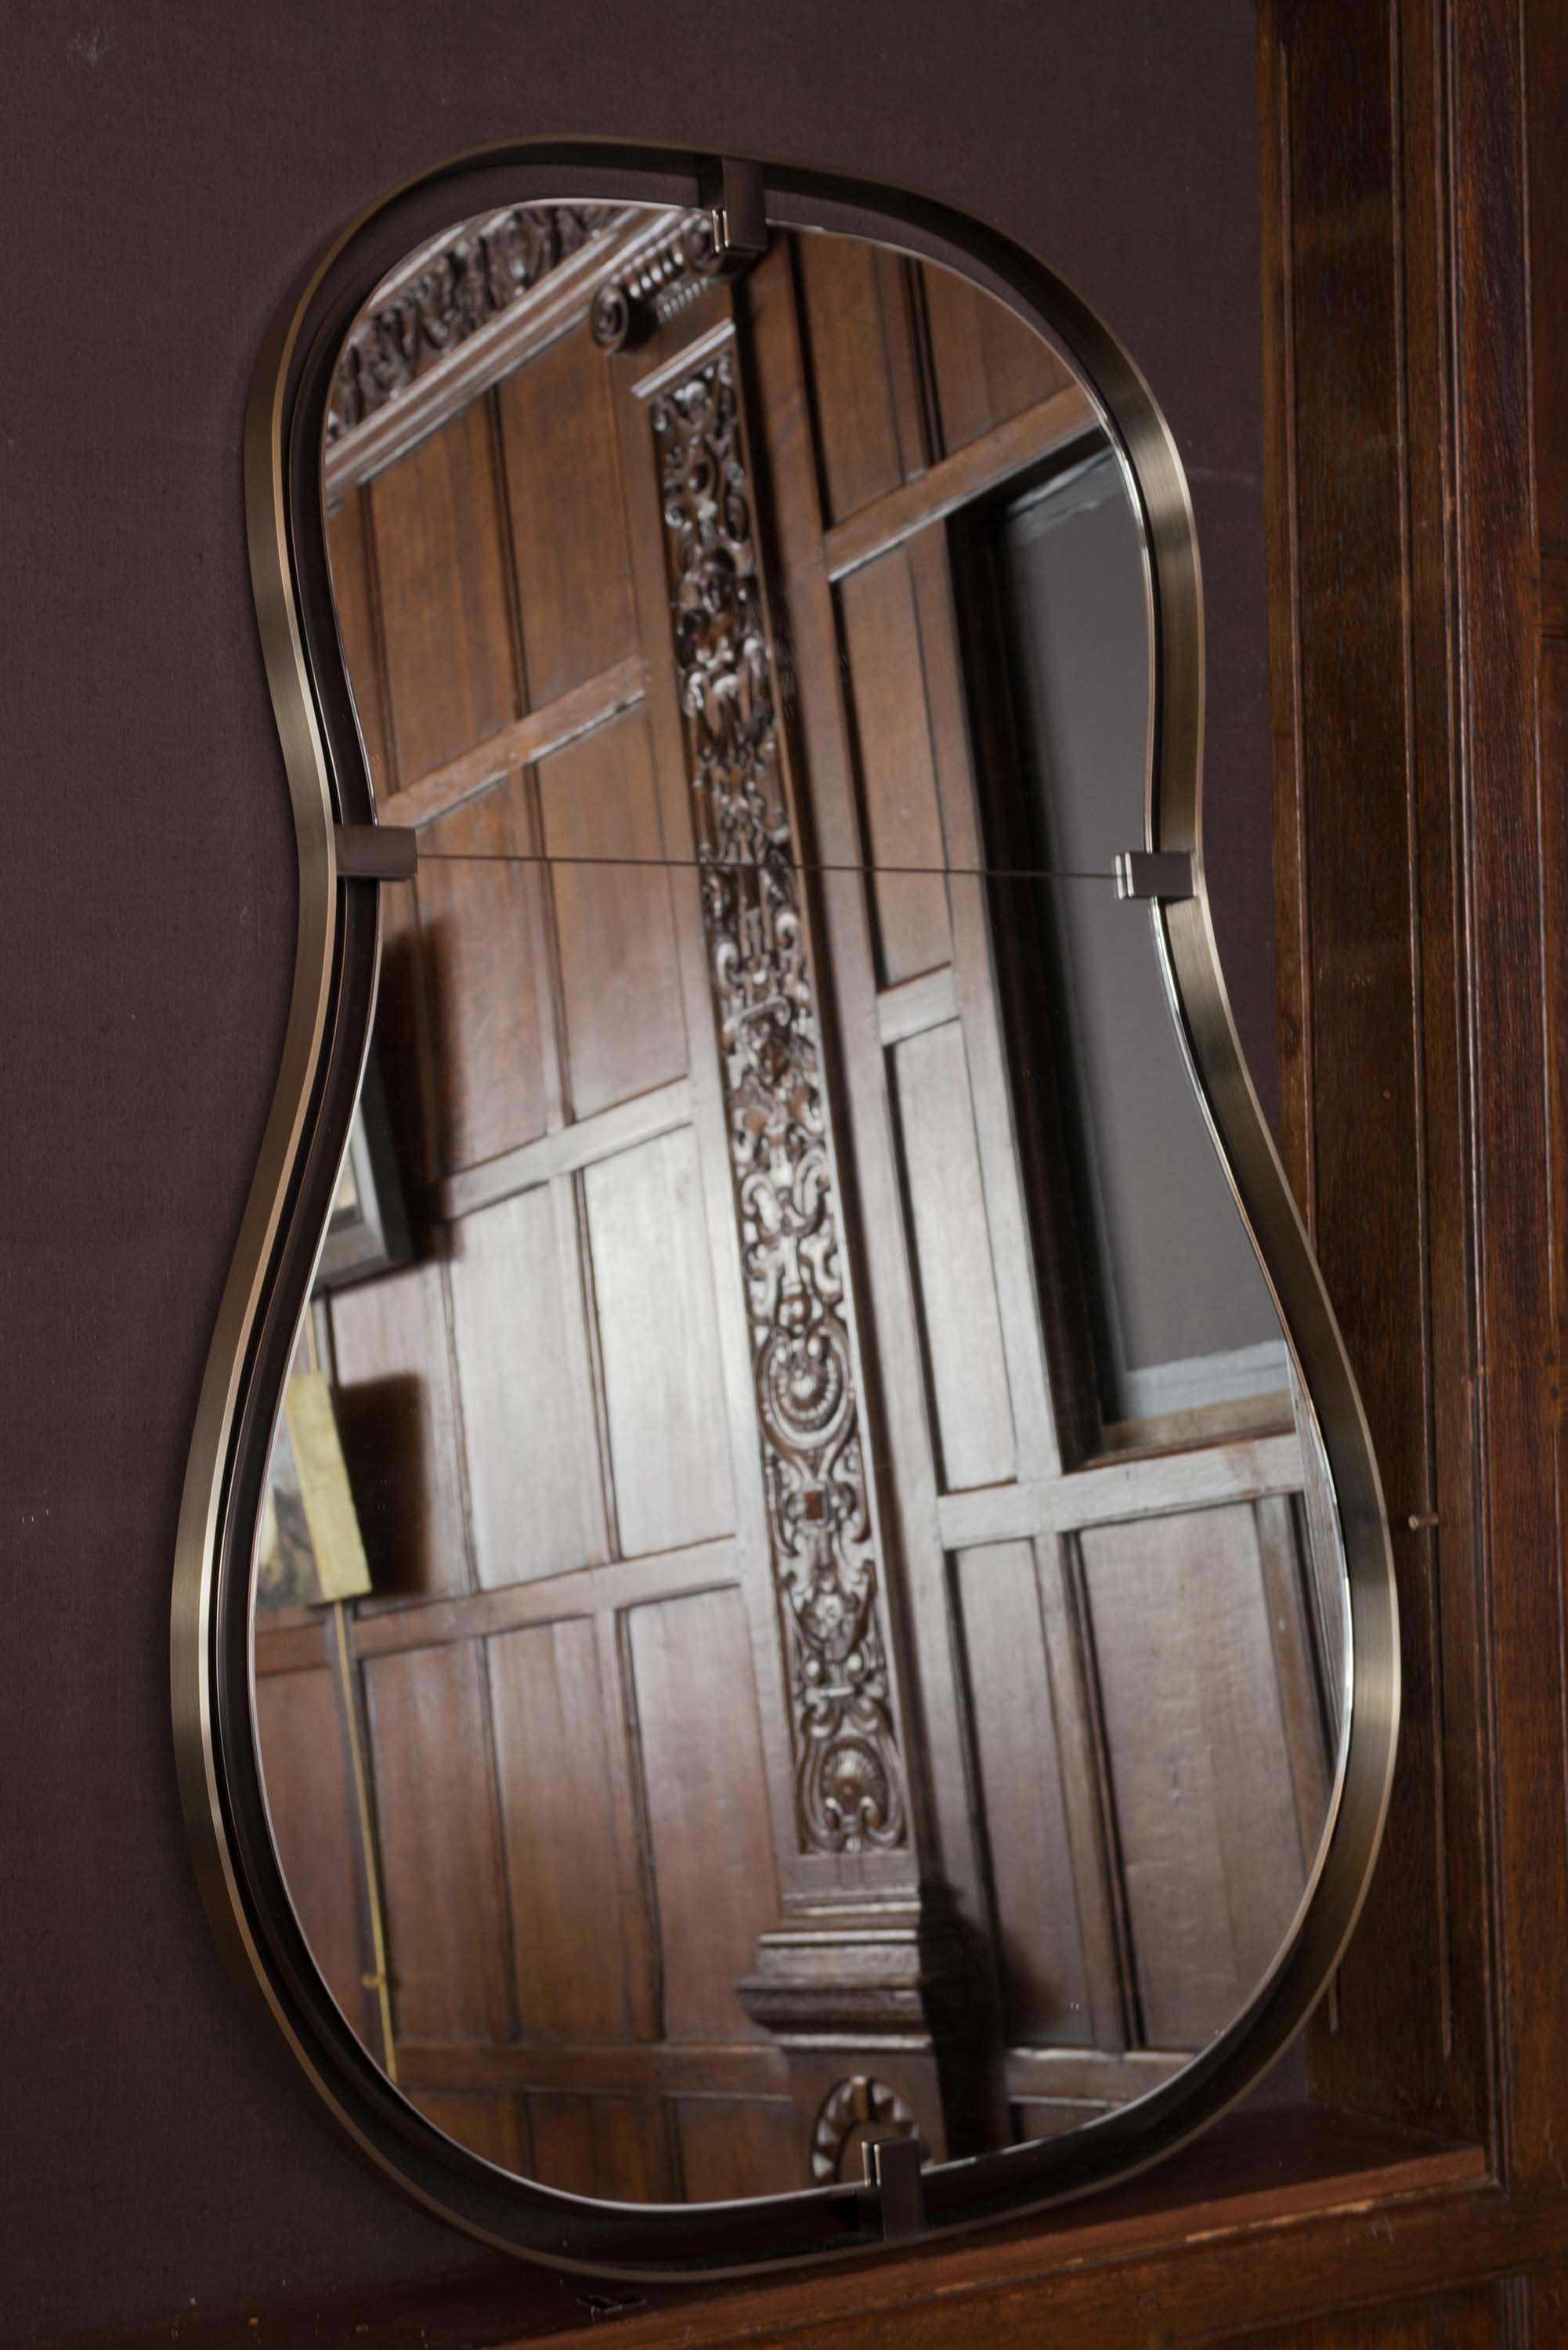 This imposing mirror is clearly feminine in shape, but offers a masculine counterpart in its metalwork. Fluid and graceful, but also stately, the Anjou Mirror adds depth to any space. Wall mirror with a metal frame. Mirror and stainless steel frame